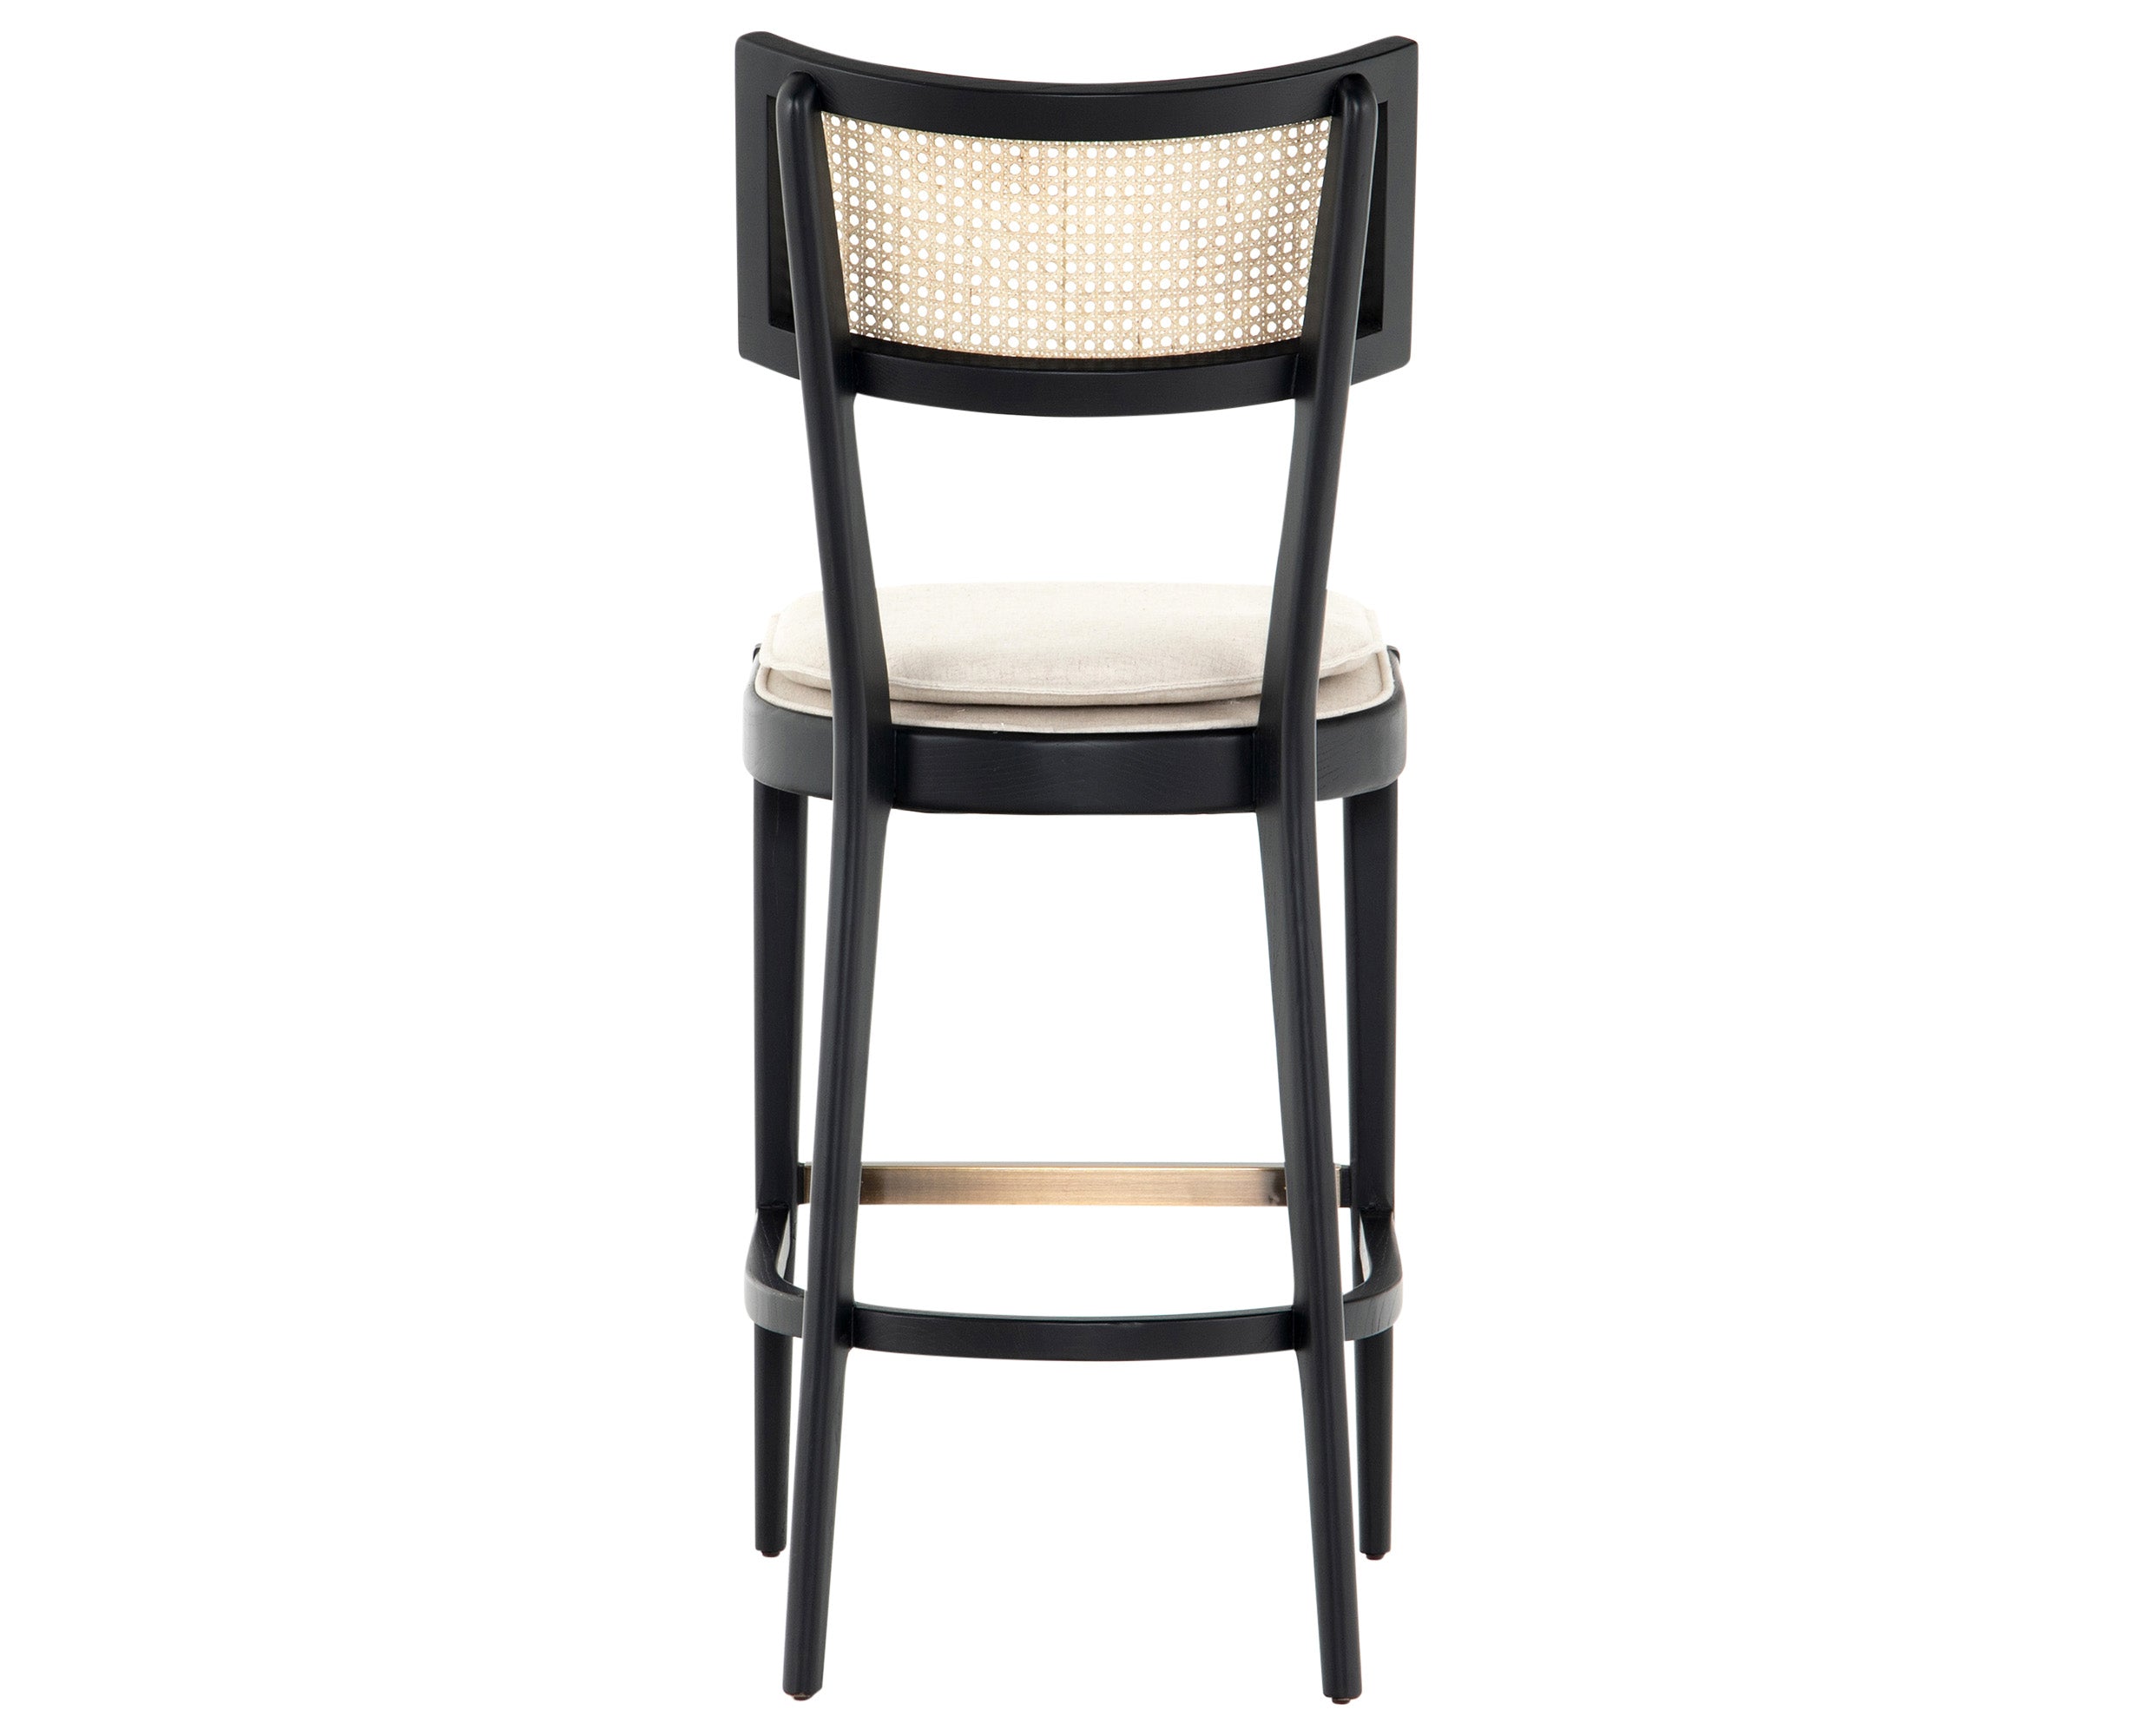 Savile Flax Fabric and Brushed Ebony Nettlewood with Natural Cane and Brass Kickplate (Bar Height) | Britt Bar/Counter Stool | Valley Ridge Furniture